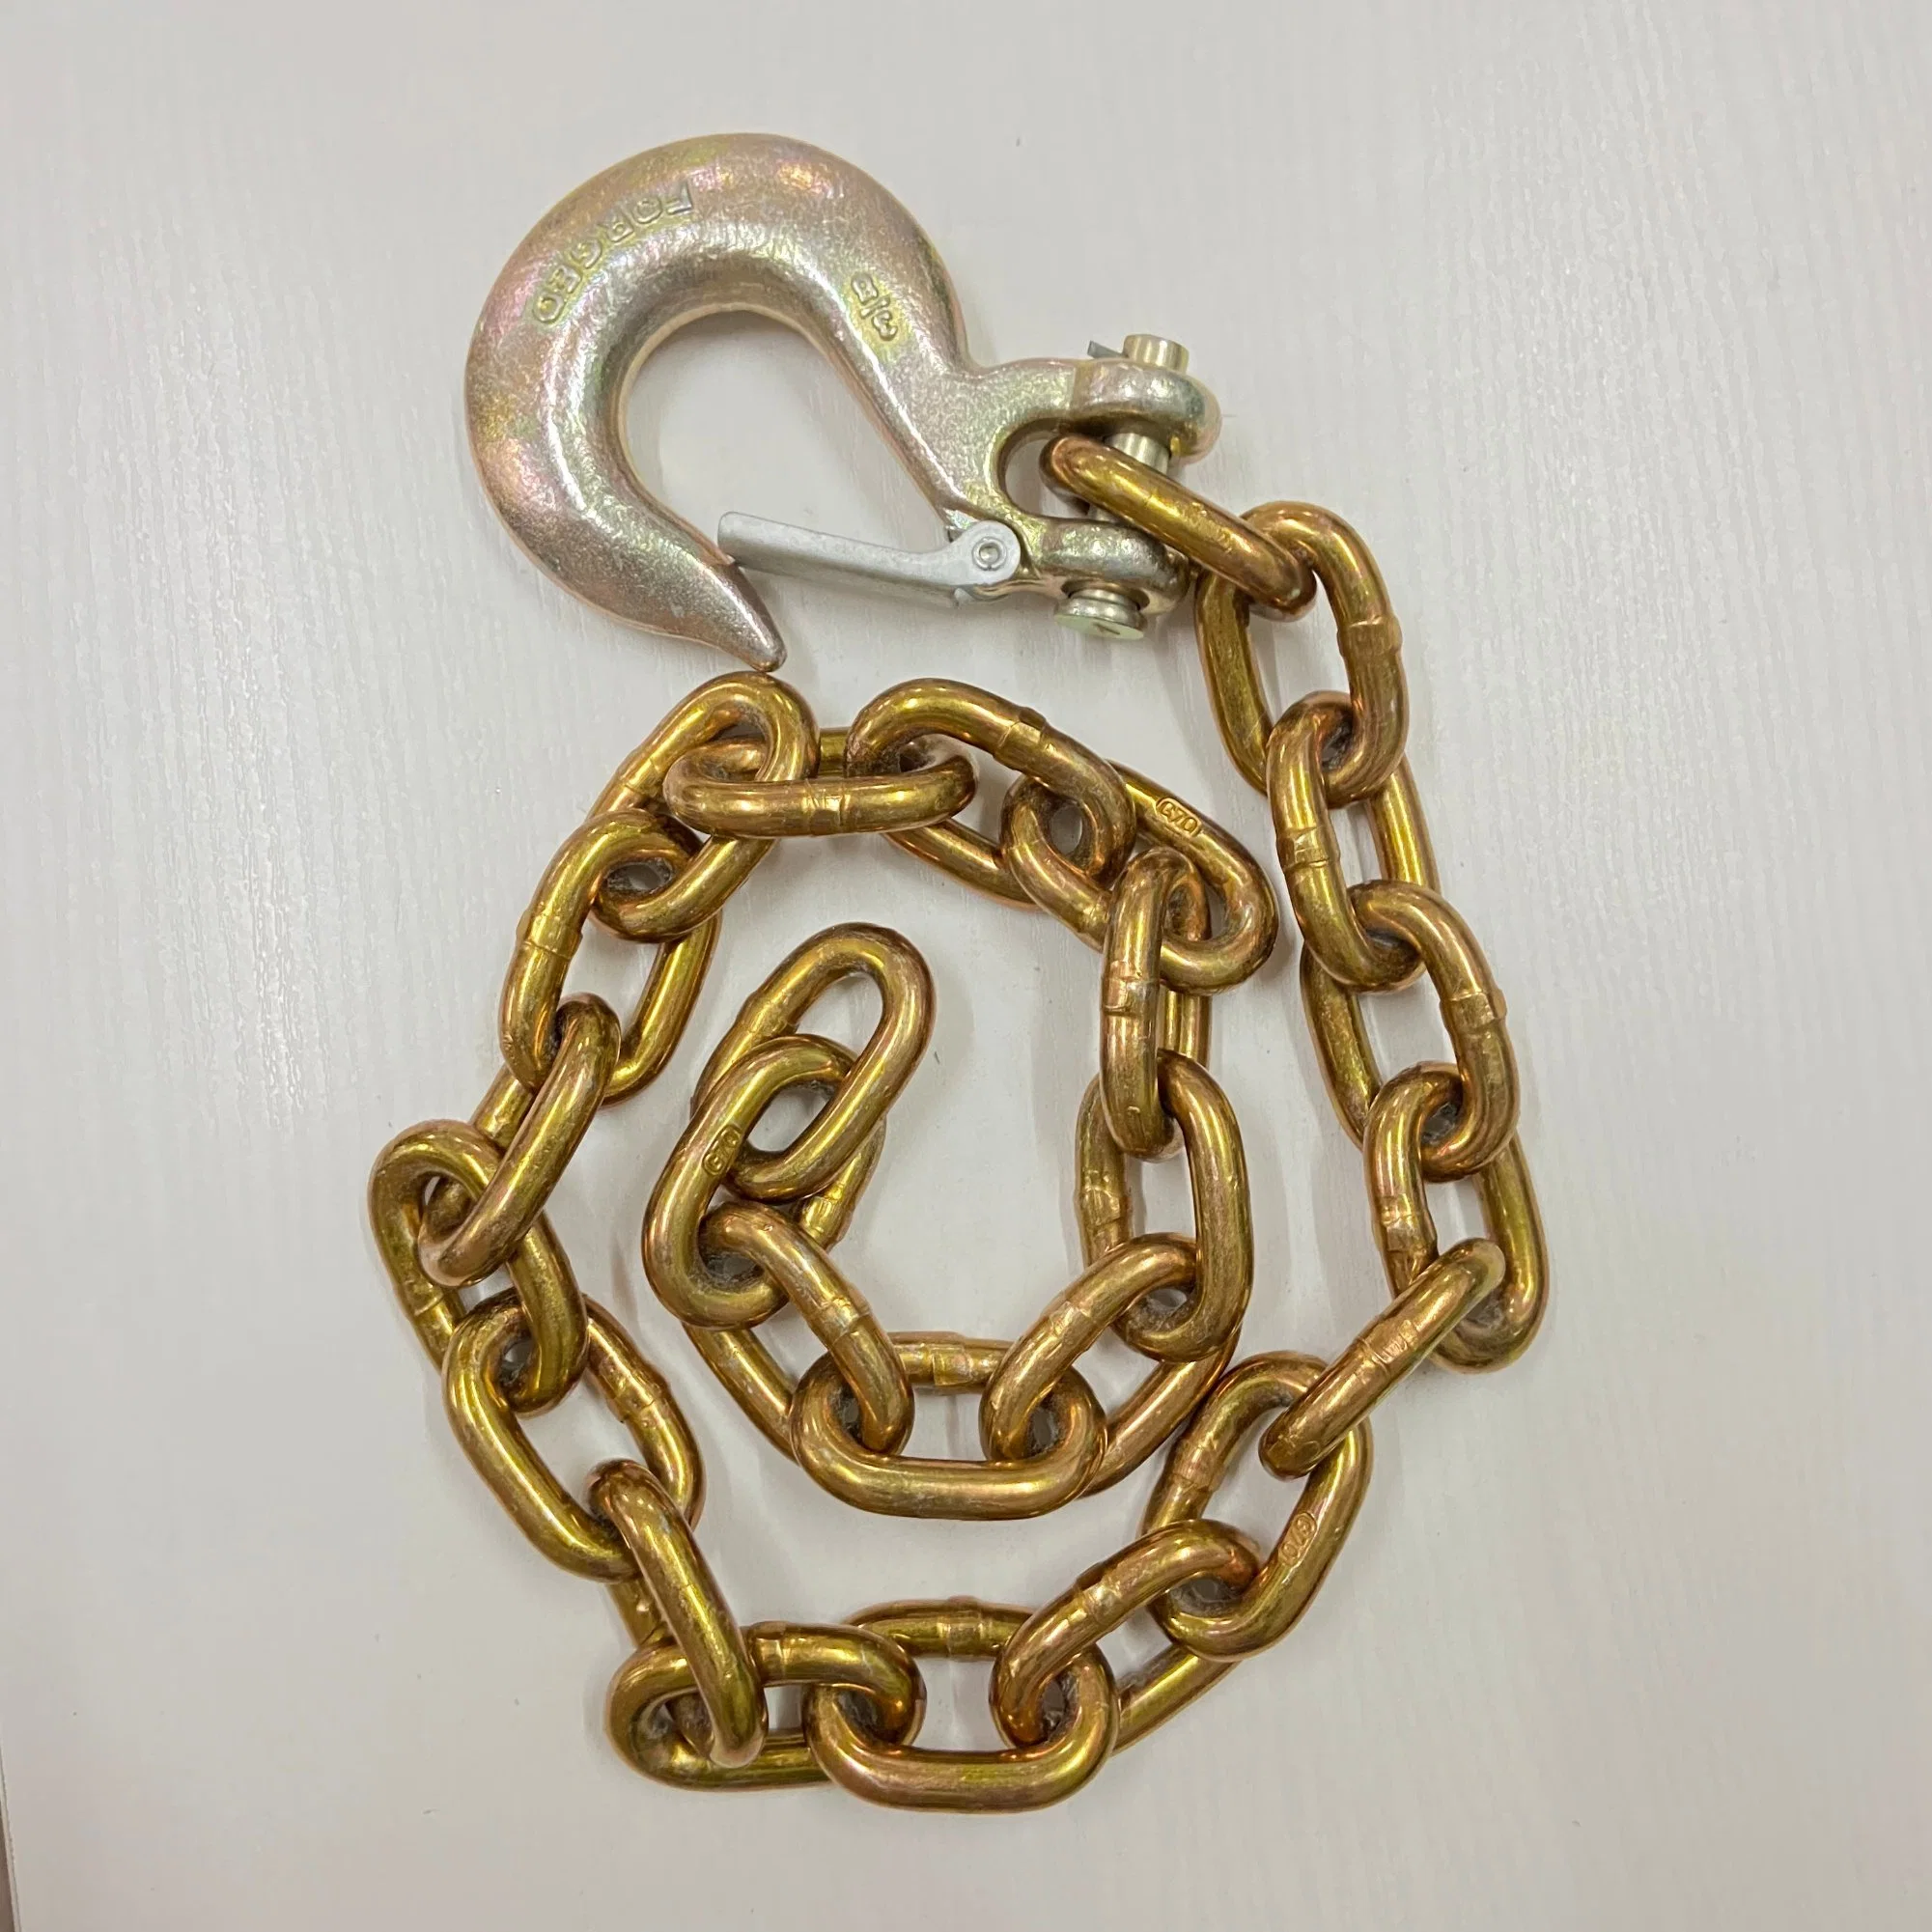 G70 1/4" Trailer Safety Chain with Clevis/Eye Slip Hook with Latch